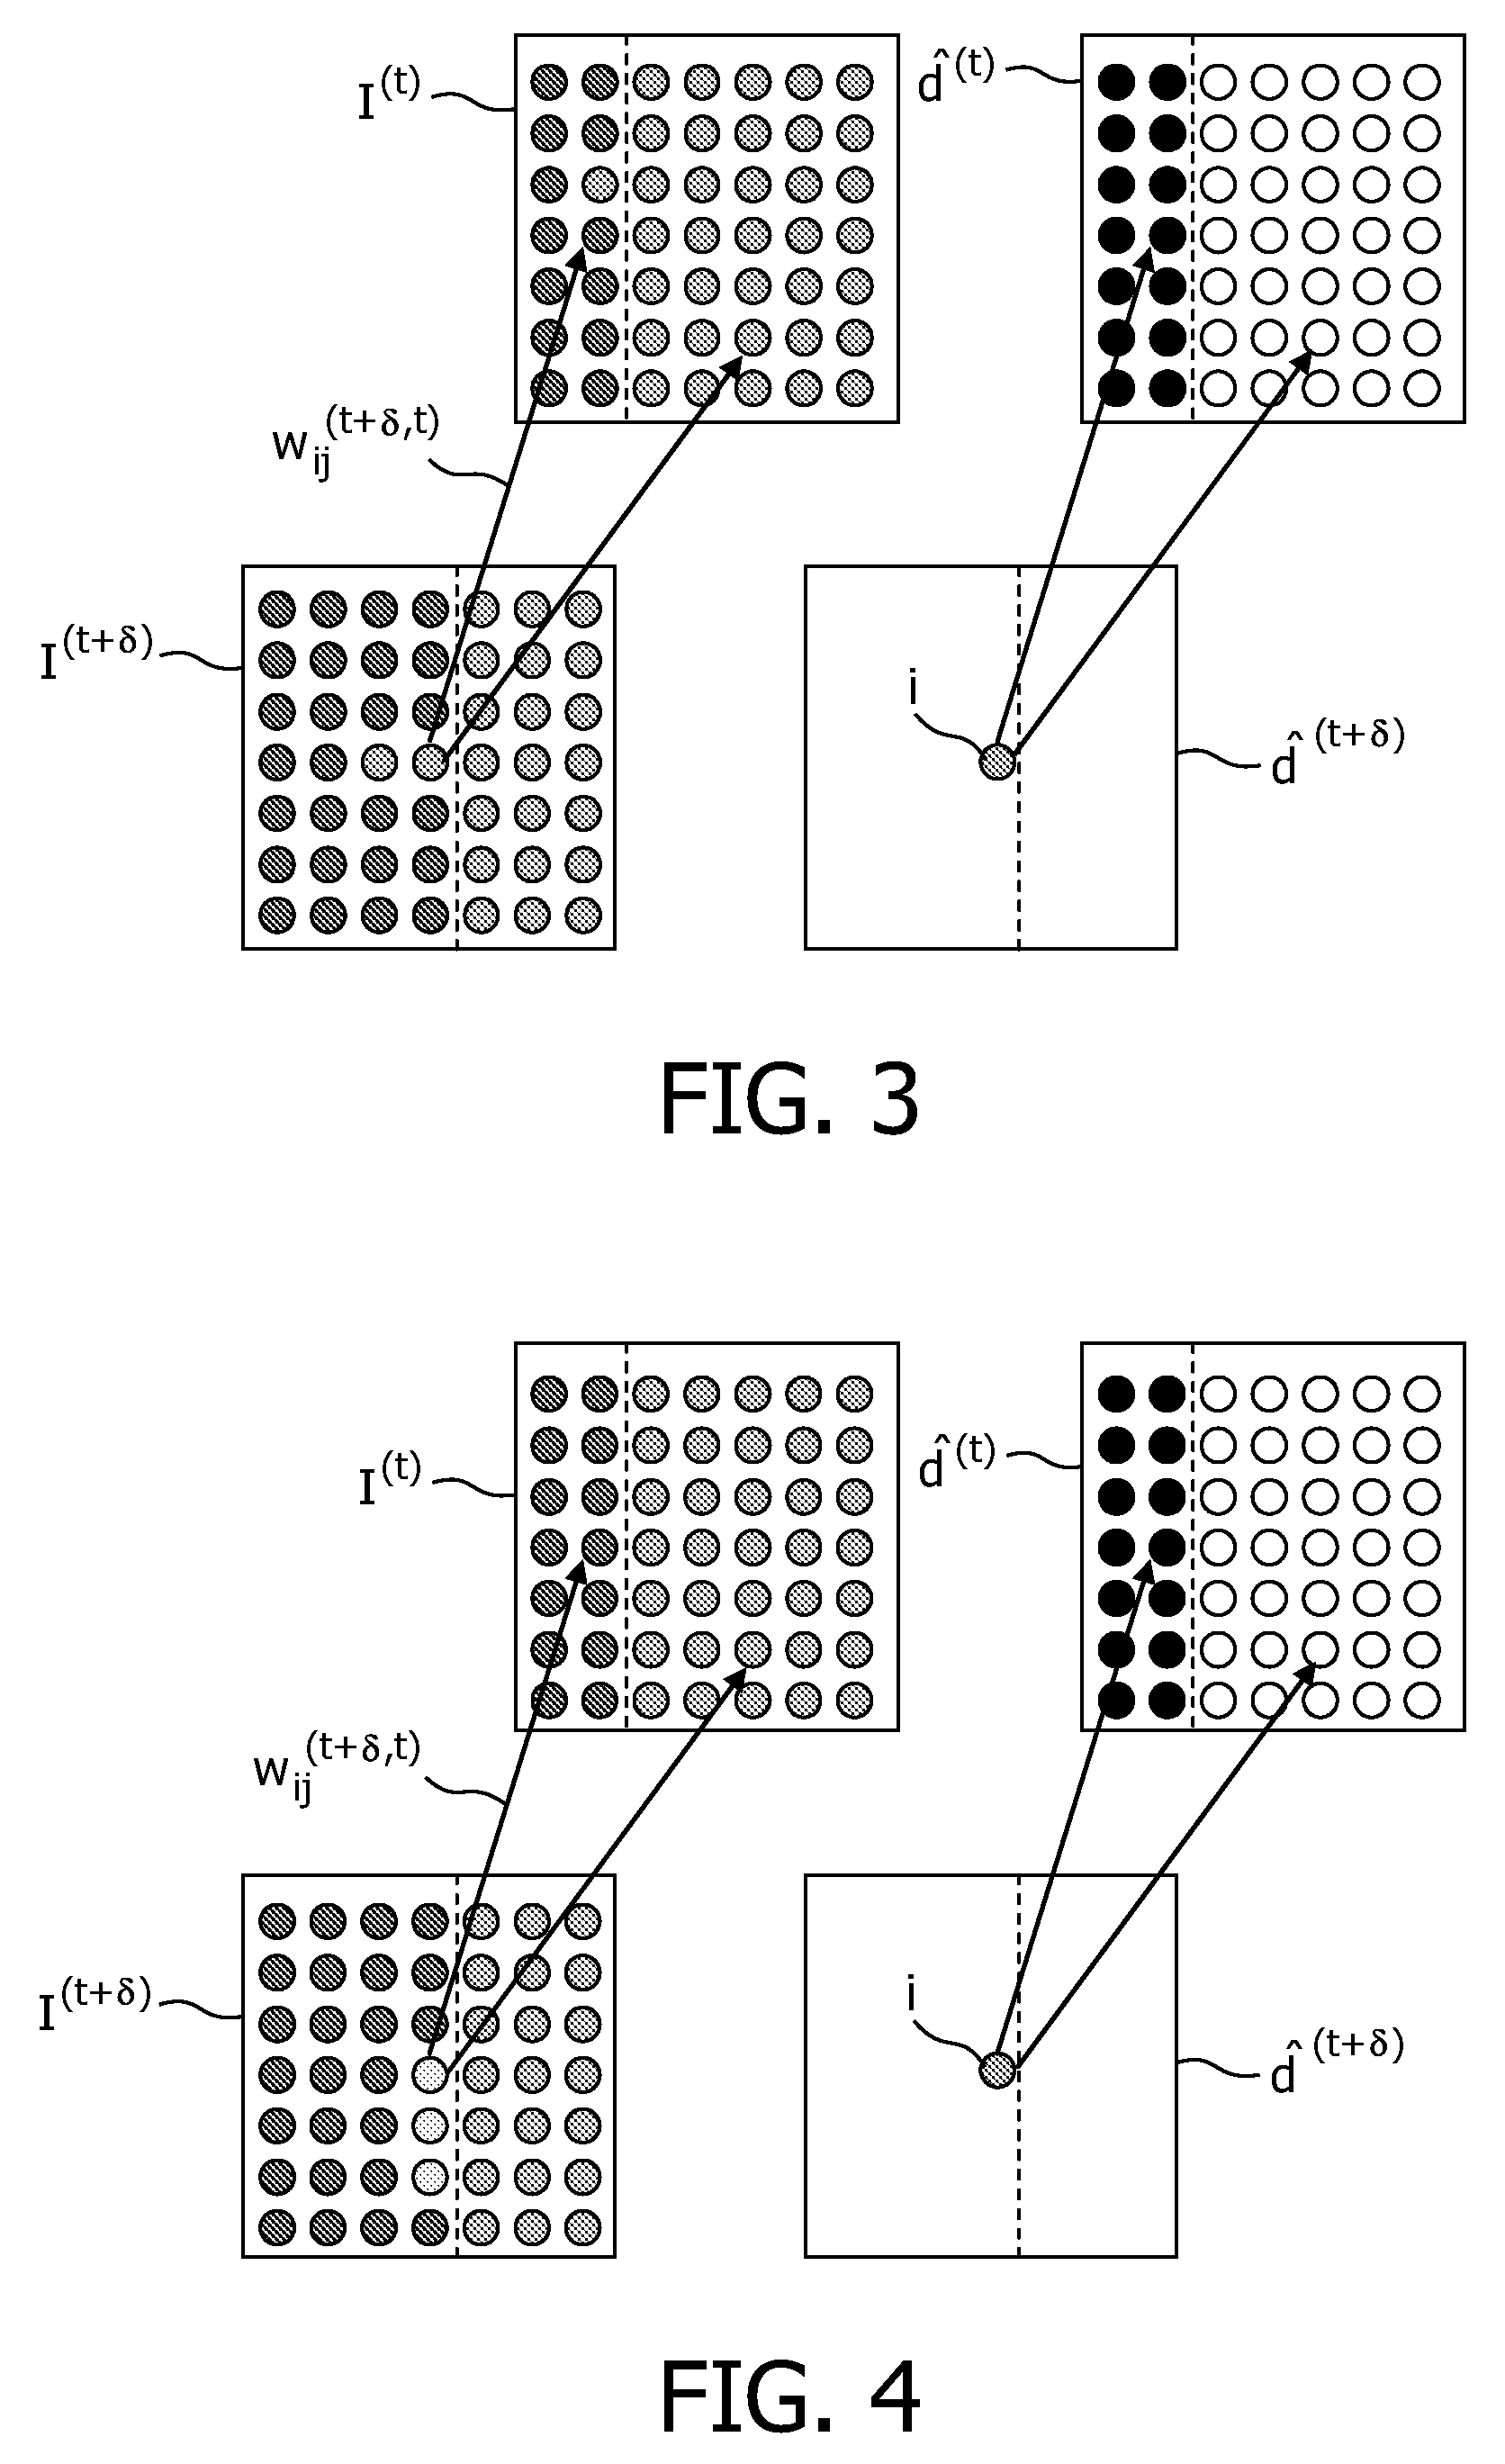 Method and apparatus for depth-related information propagation